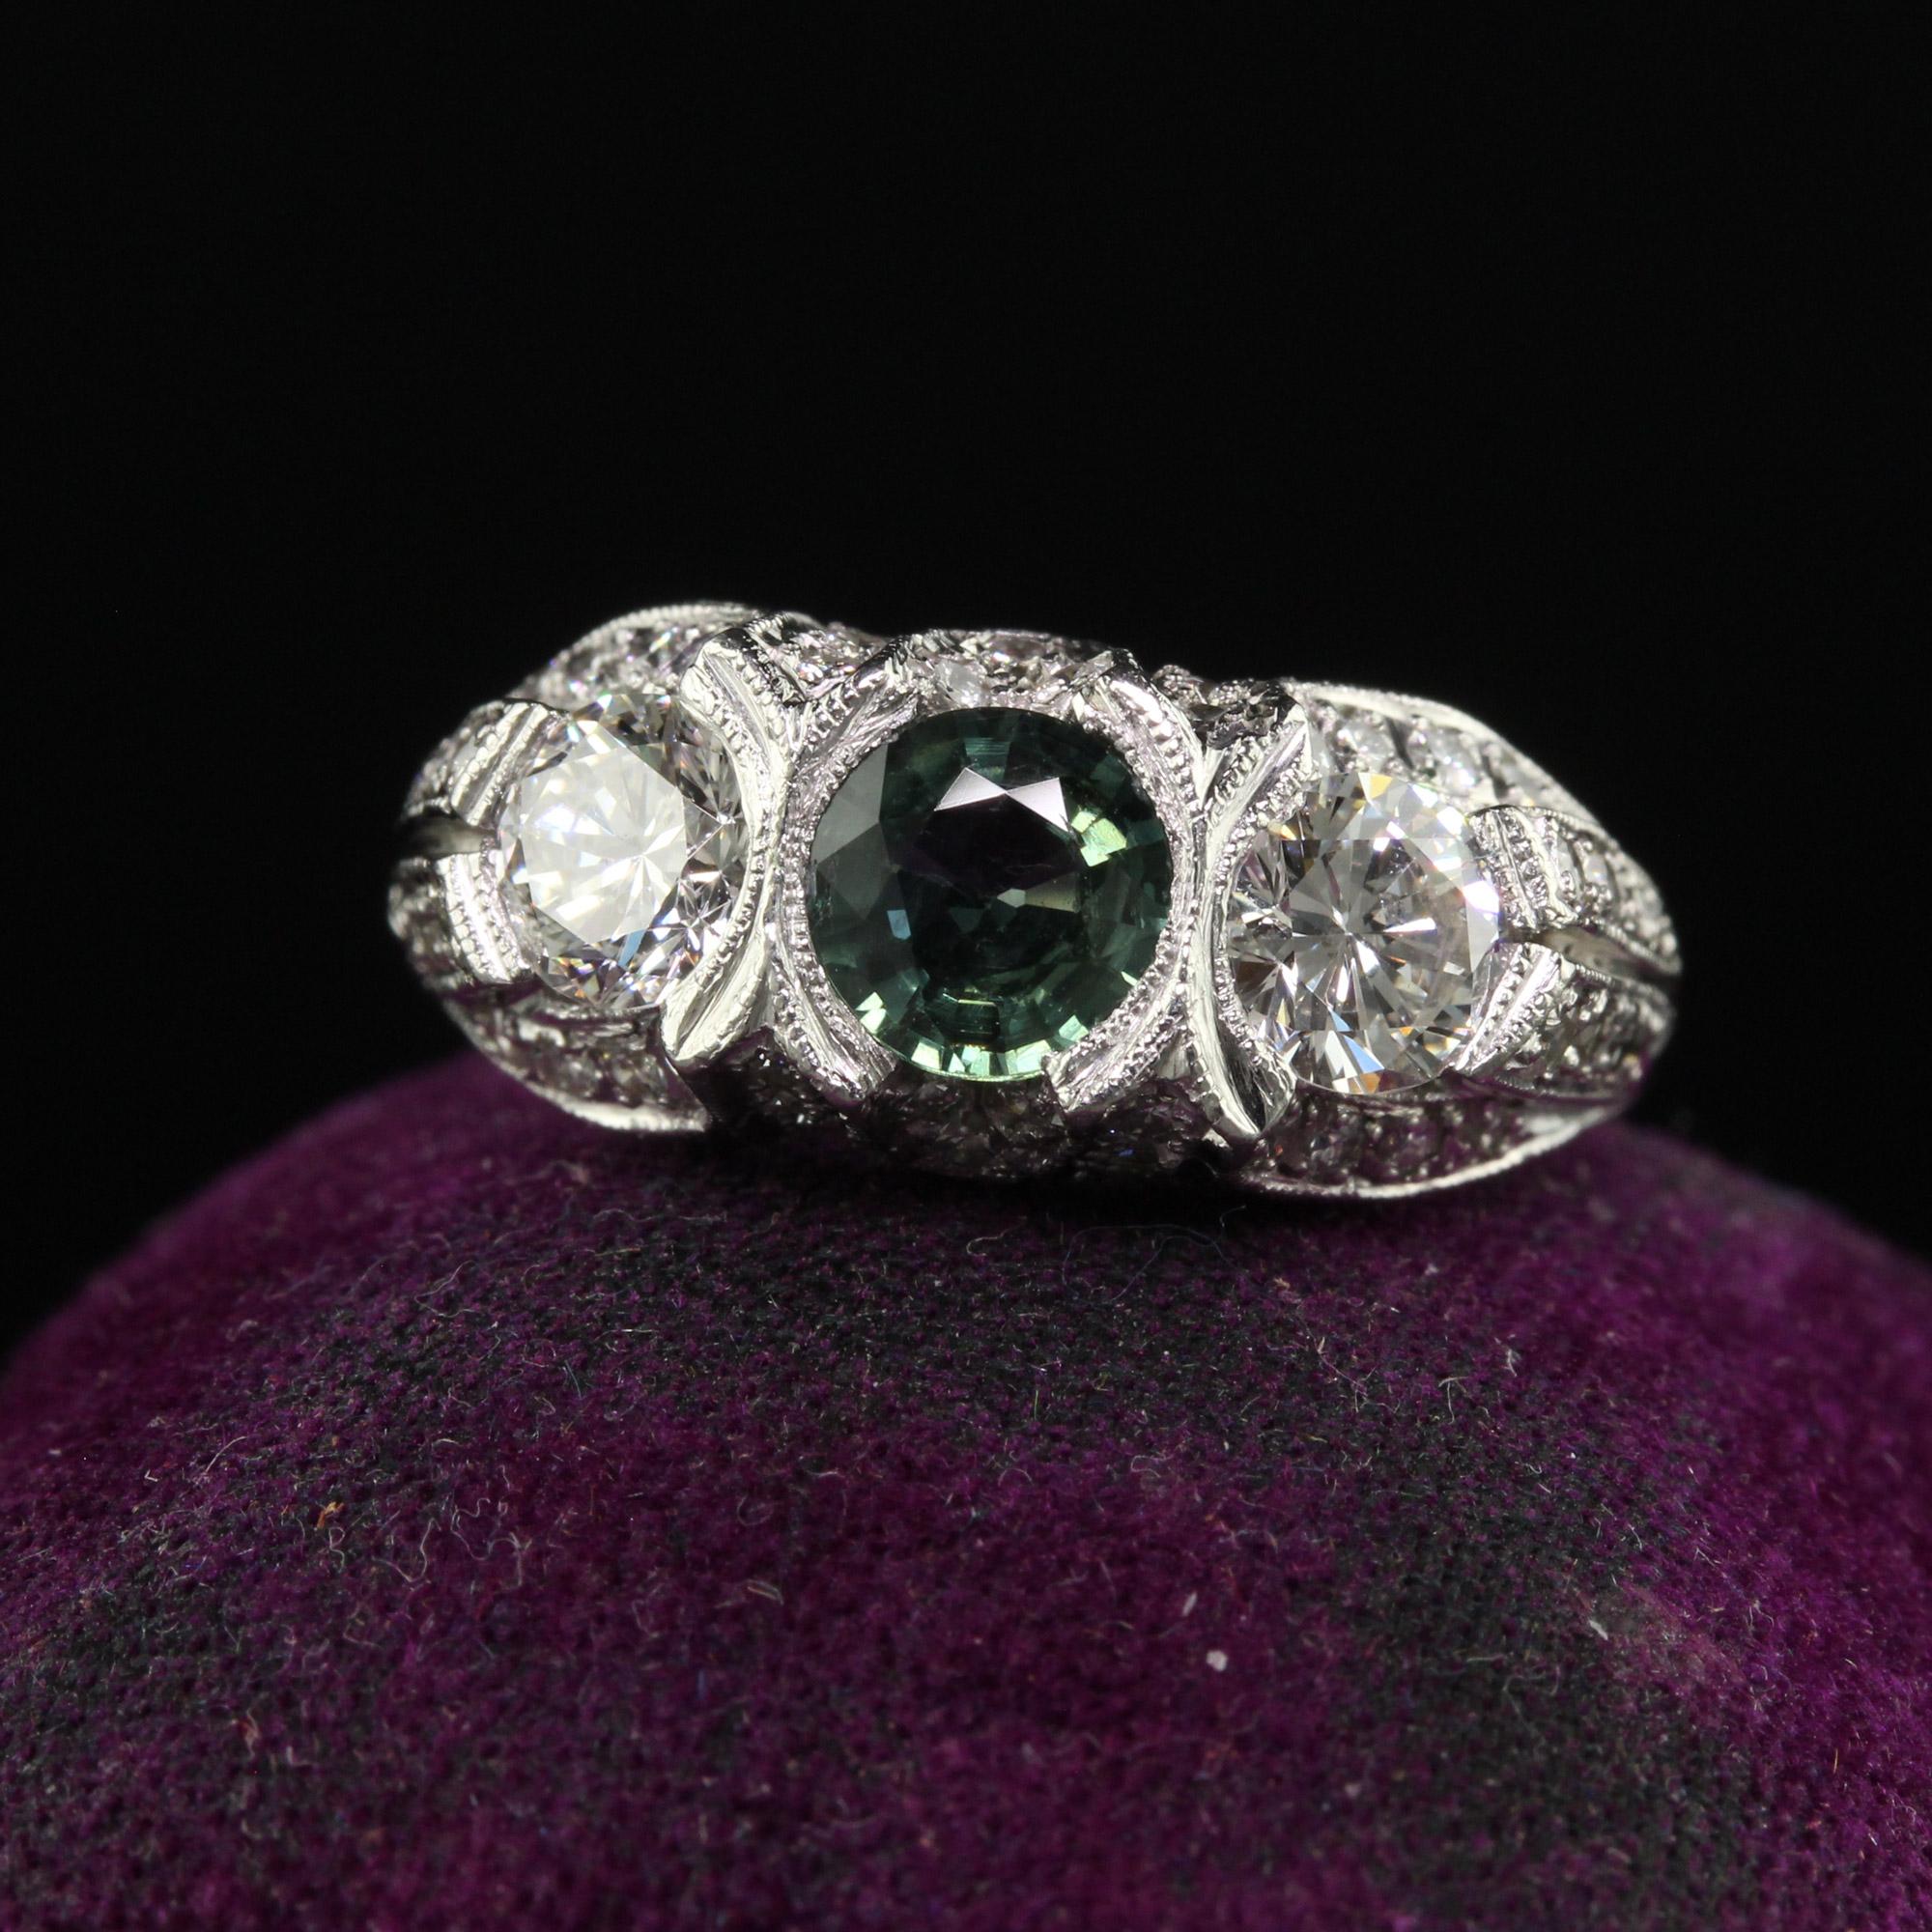 Beautiful Vintage Estate Retro Platinum Diamond and Green Sapphire Three Stone Ring. This beautiful retro three stone ring is crafted in platinum. The top of the ring has two transitional cut diamonds and a natural green sapphire center. The sides